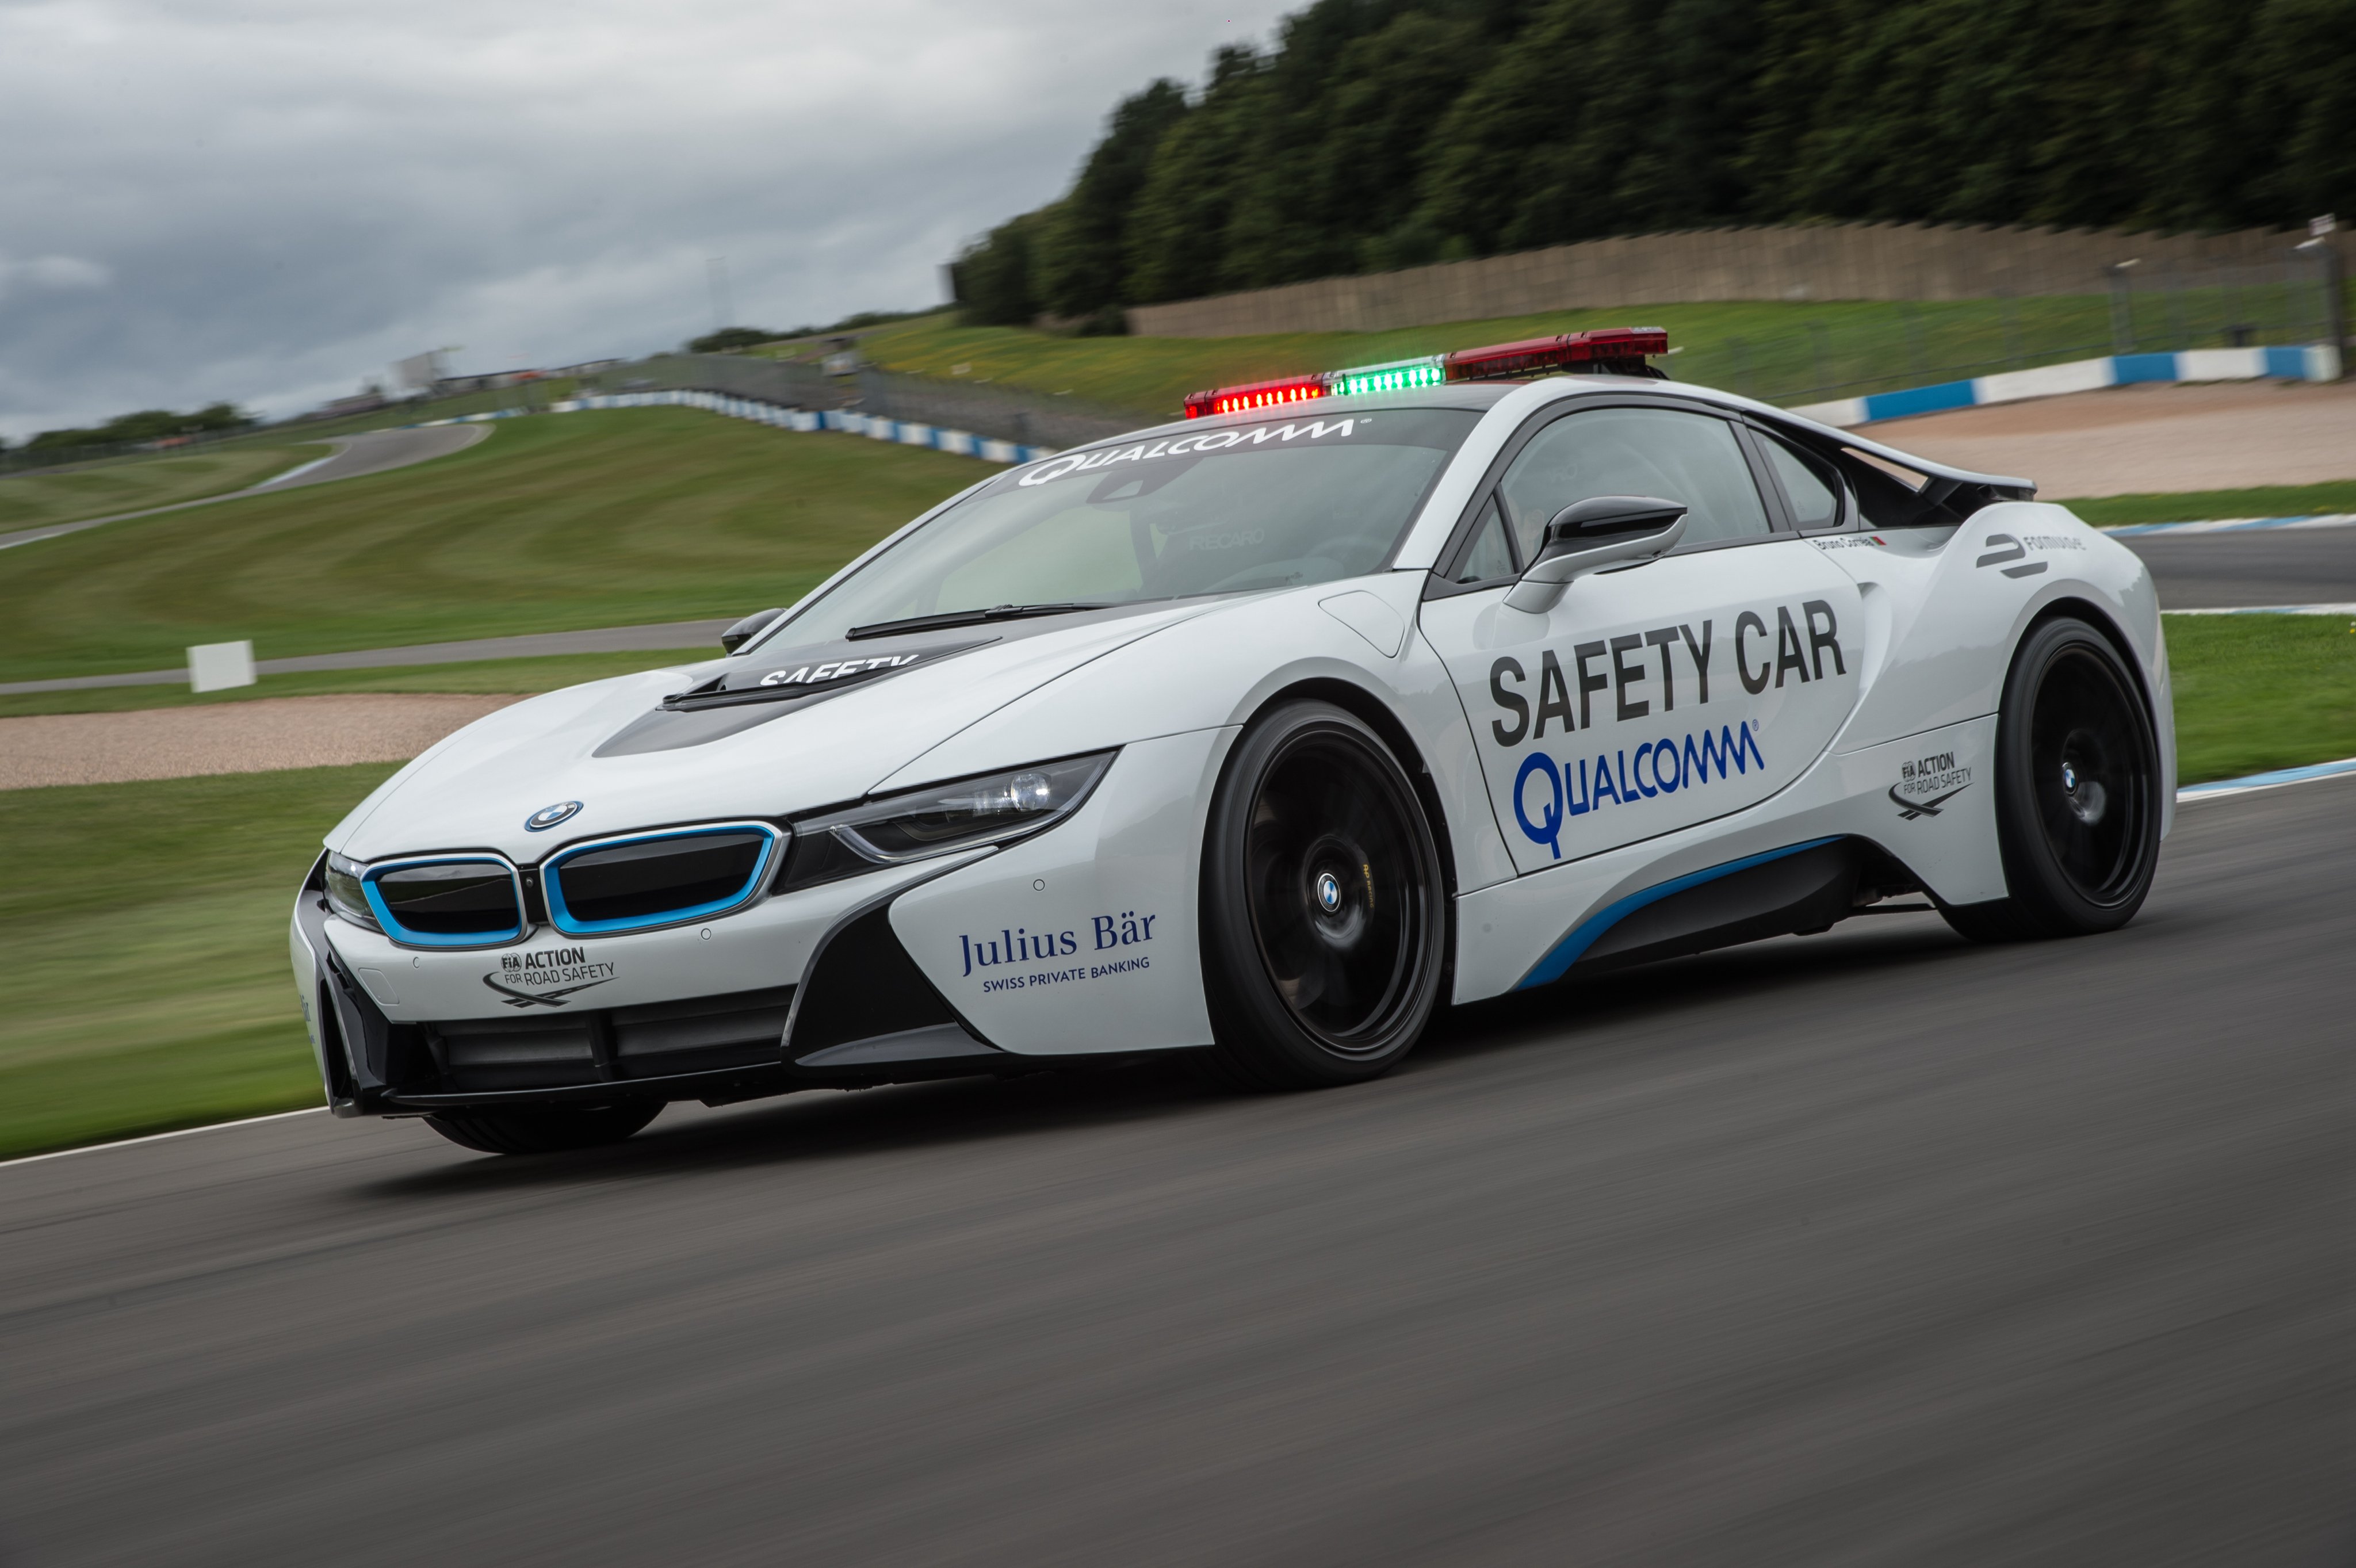 bmw i8, Formula e, Safety, Car, Cars, Electric, 2014 Wallpapers HD